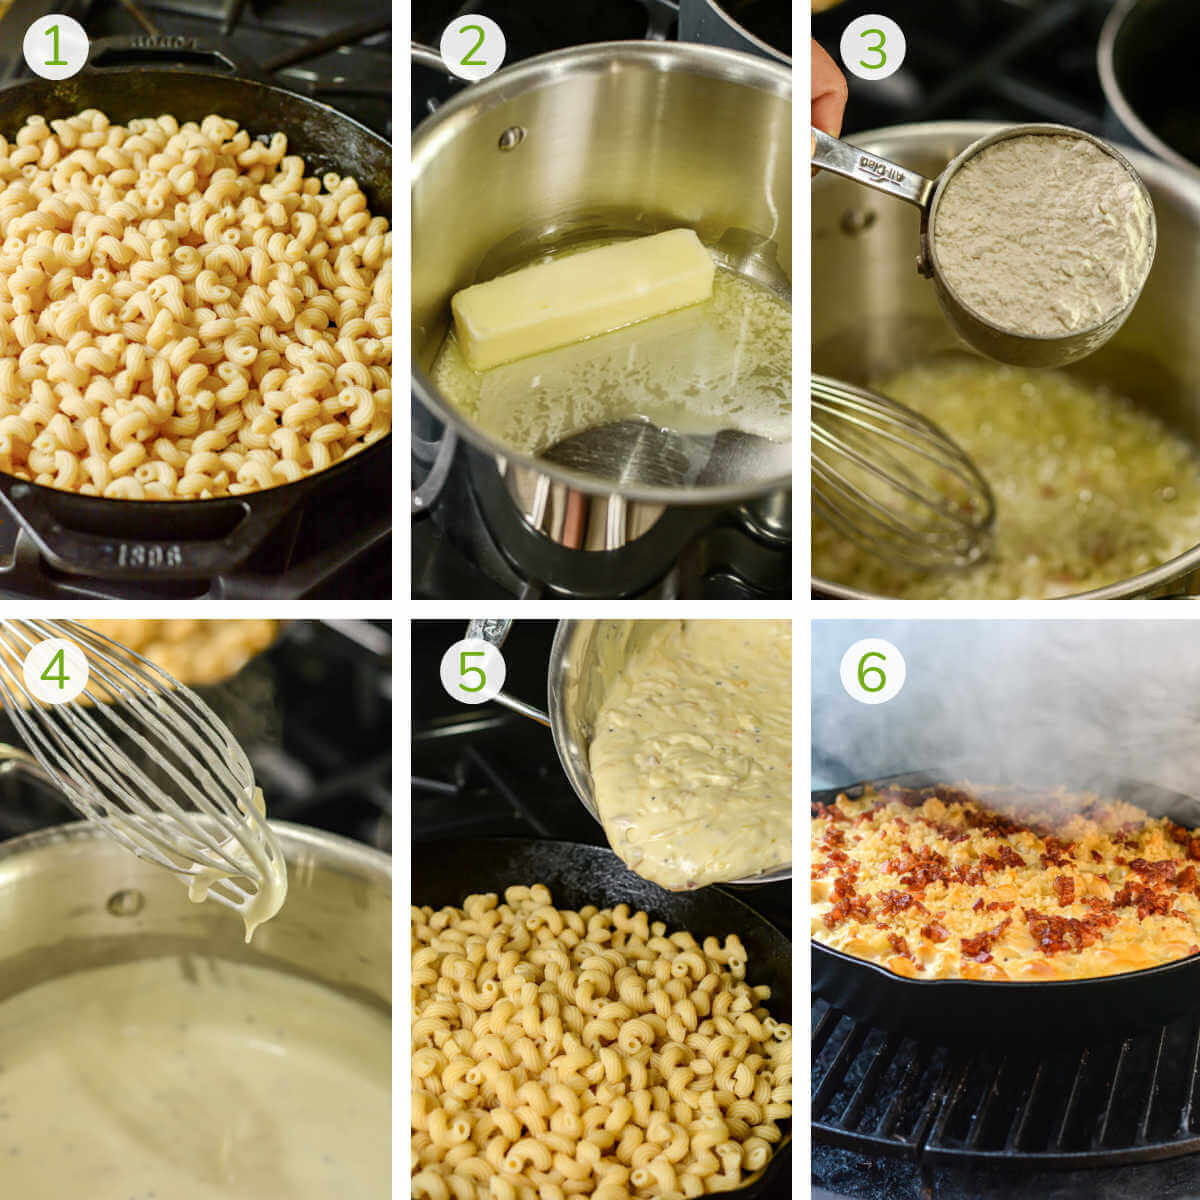 instruction photos showing boiling the cavatappi, making the roux, adding the cheeses, and smoking the mac and cheese.